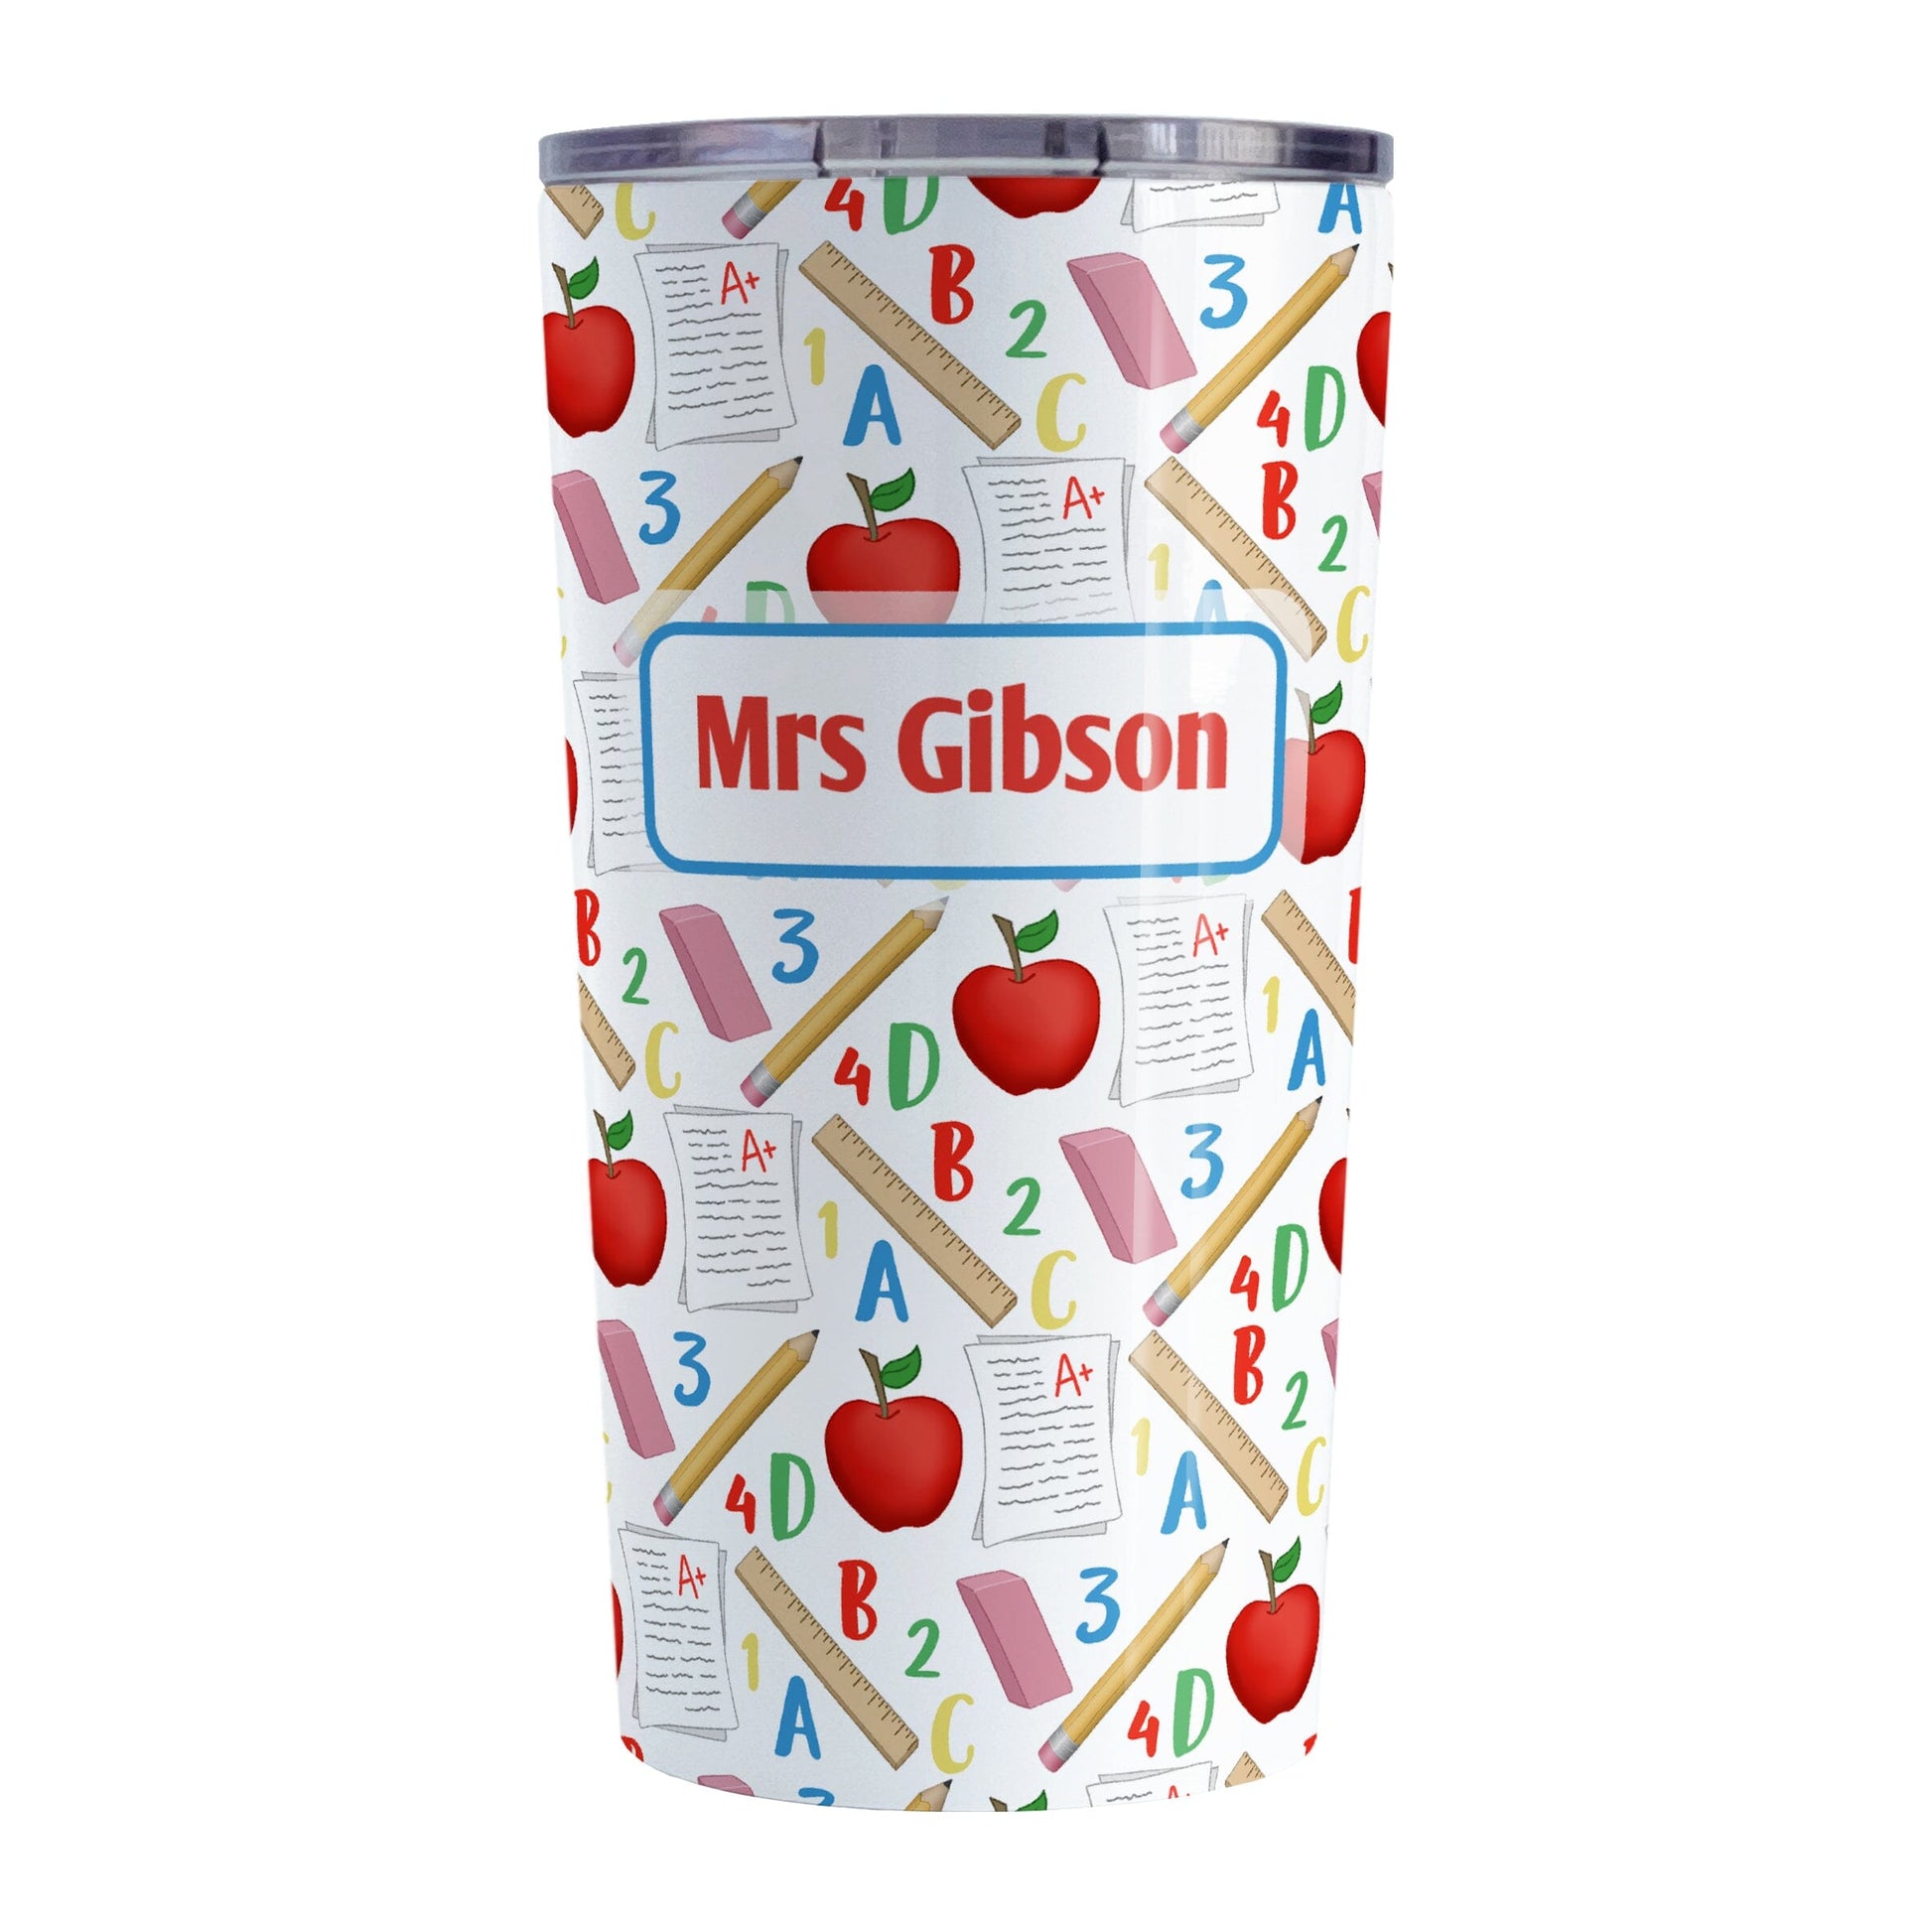 Personalized School Pattern Tumbler Cup (20oz) at Amy's Coffee Mugs. A stainless steel tumbler cup designed with a school-themed pattern with apples, rulers, erasers, graded papers, numbers, and letters that wraps around the cup. Your personalized name or your teacher's name is custom printed in red over the school pattern.